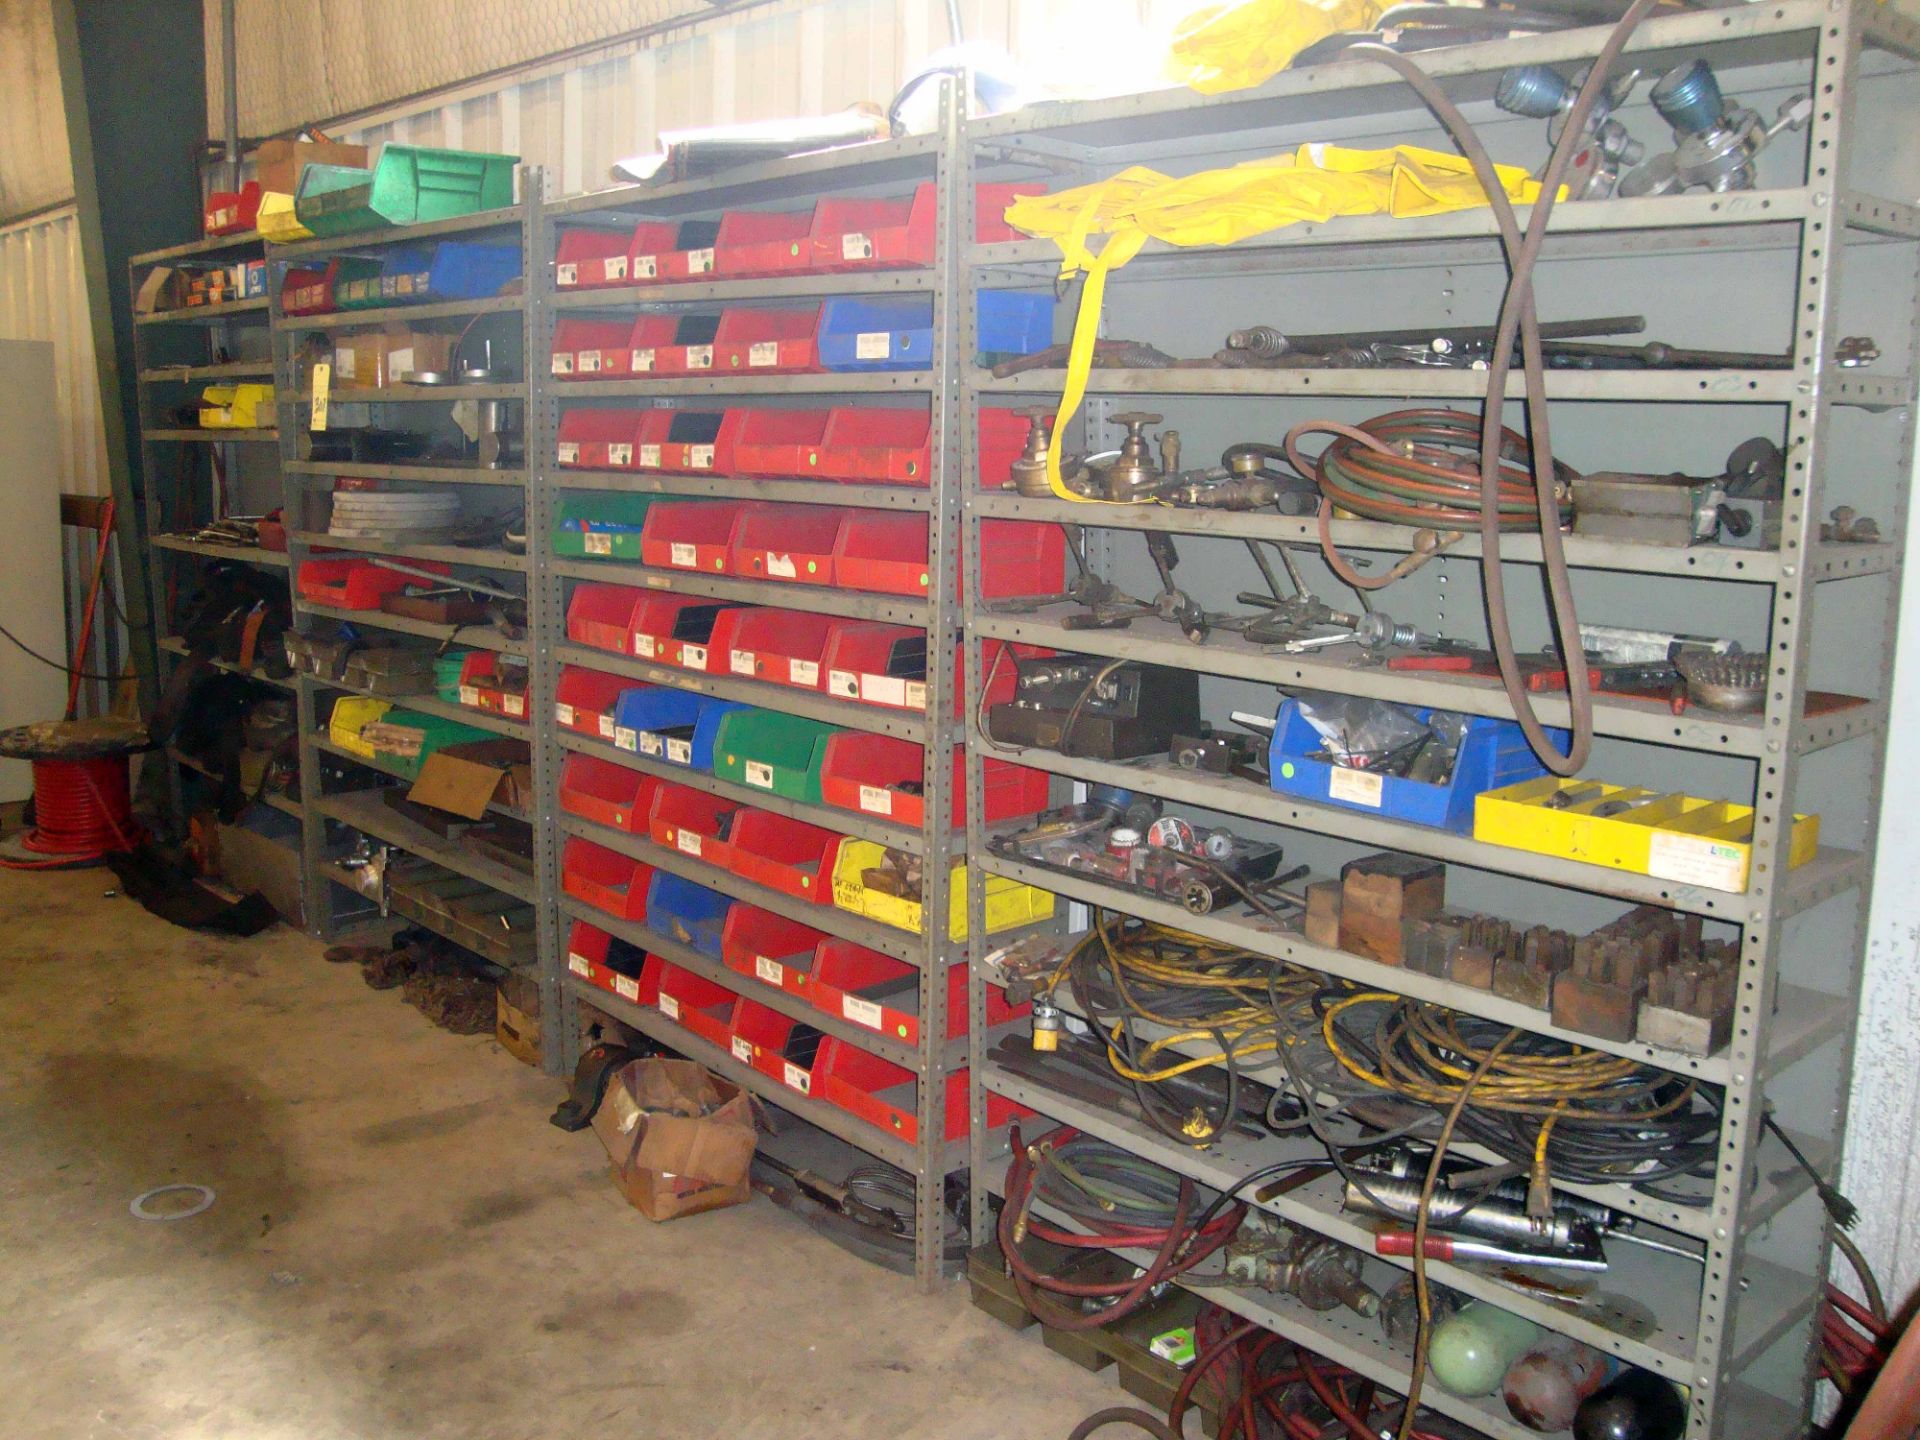 LOT OF STEEL SHELF SECTIONS (4), w/tooling, safety equipment, supplies, etc. - Image 2 of 6